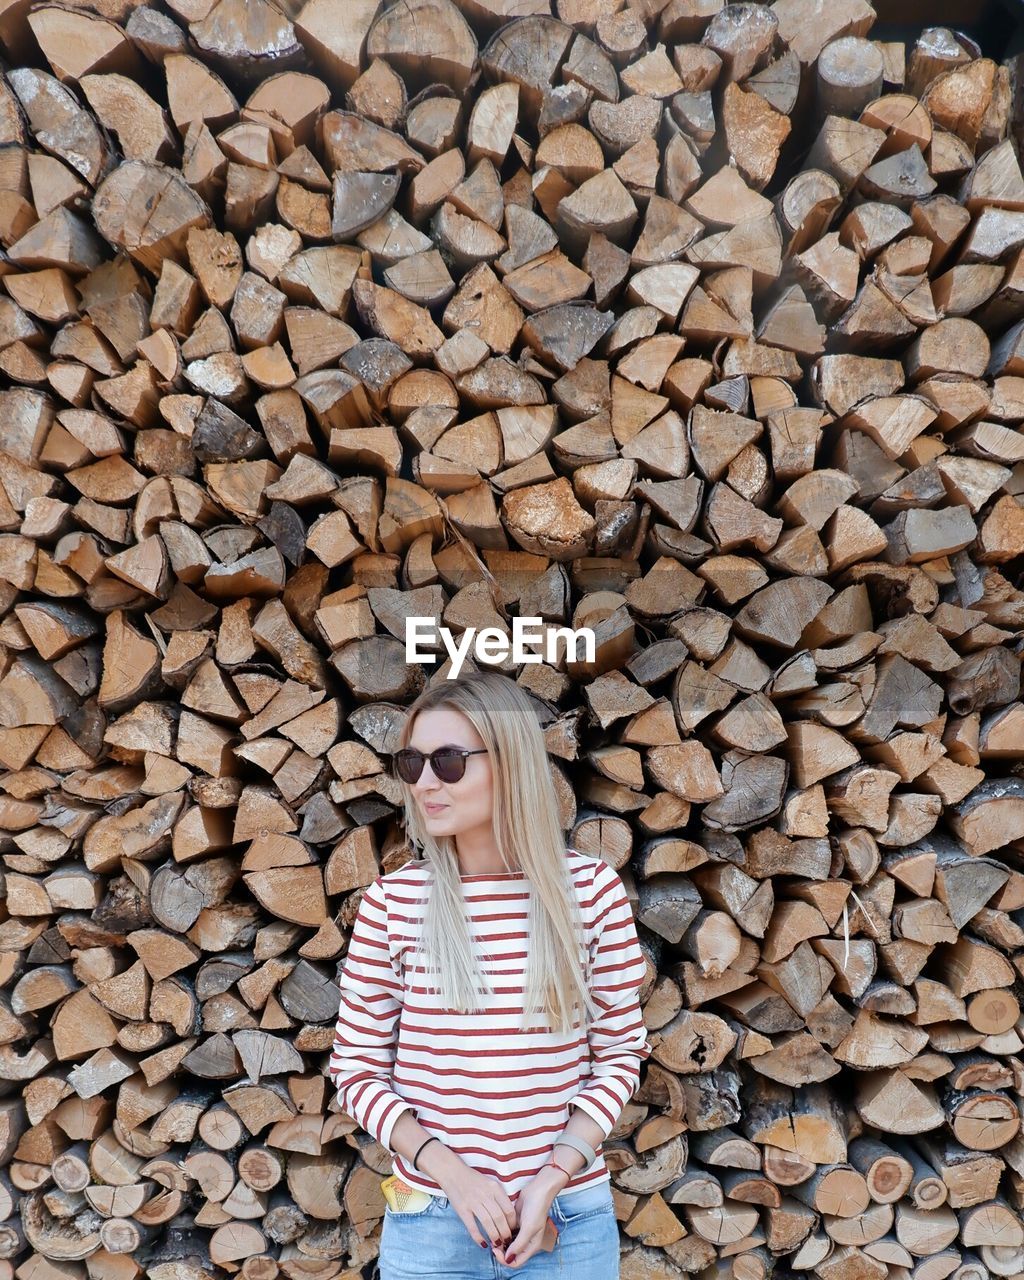 Woman wearing sunglasses standing against woodpile